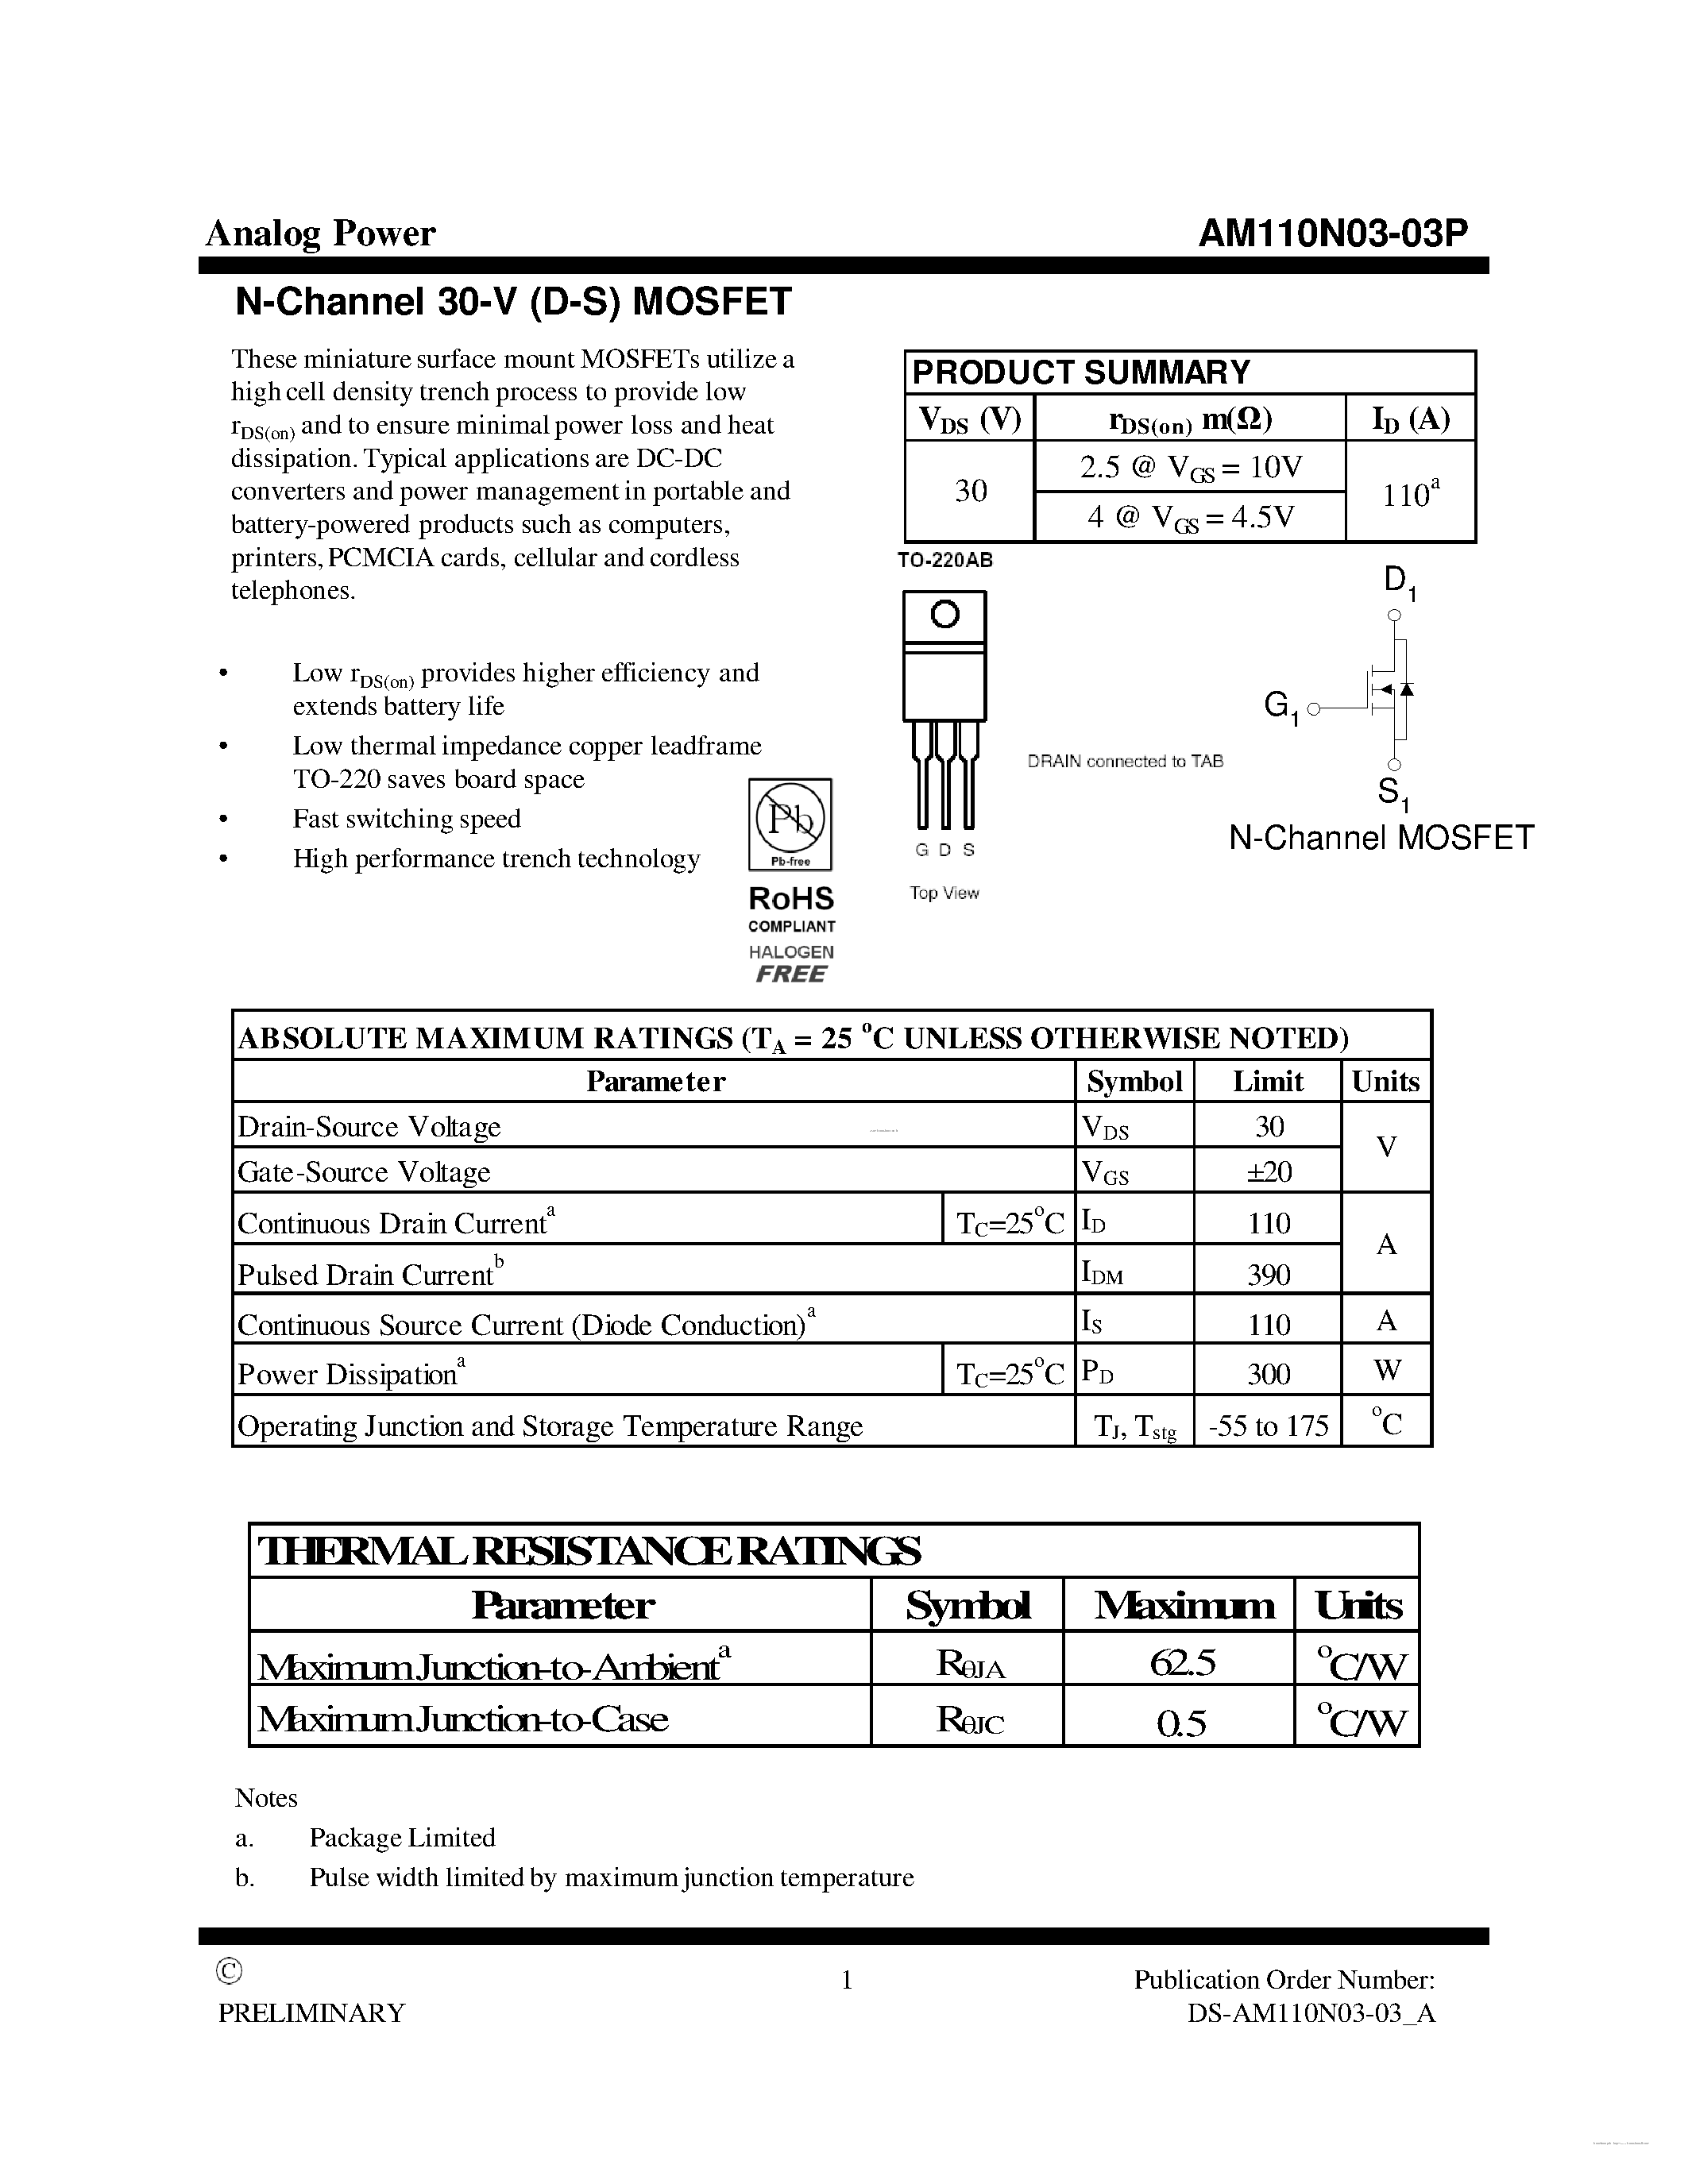 Datasheet AM110N03-03P - N-Channel 30-V (D-S) MOSFET page 1